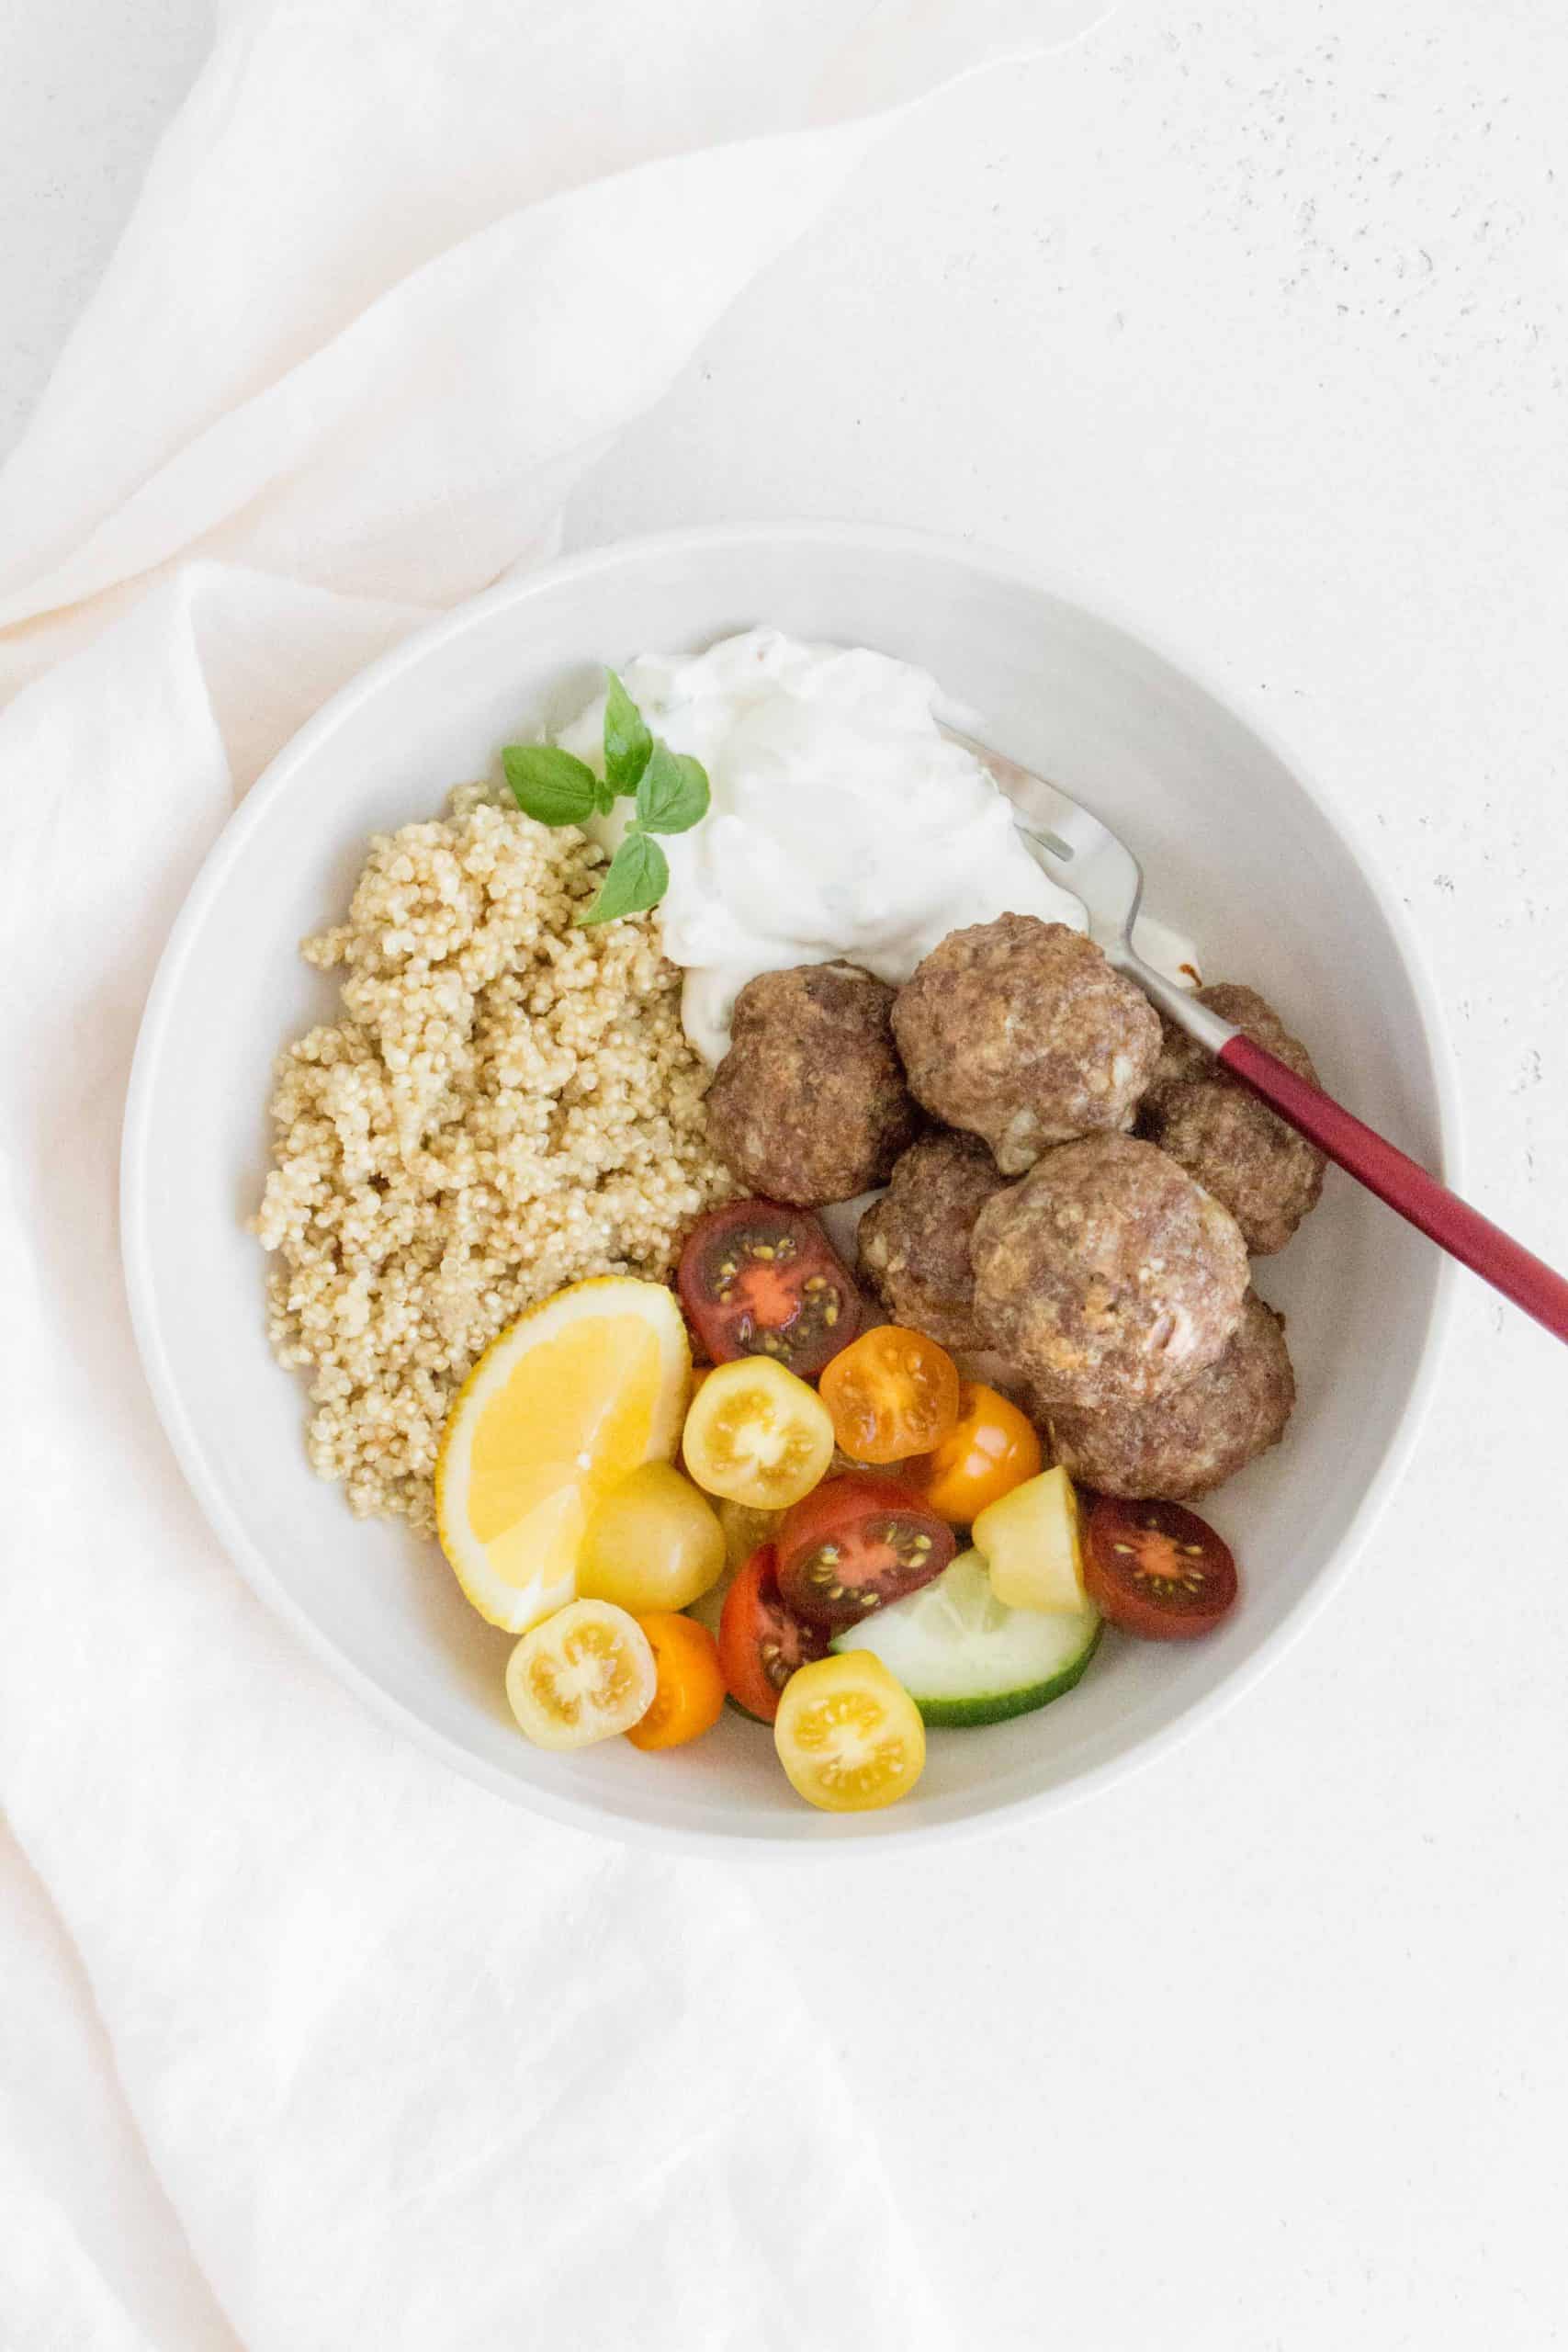 These healthy and delicious Greek Meatball served with a side of quinoa and tzatziki sauce are perfect dinner or meal prepping! The Greek meatballs are freezer friendly and full of flavour!